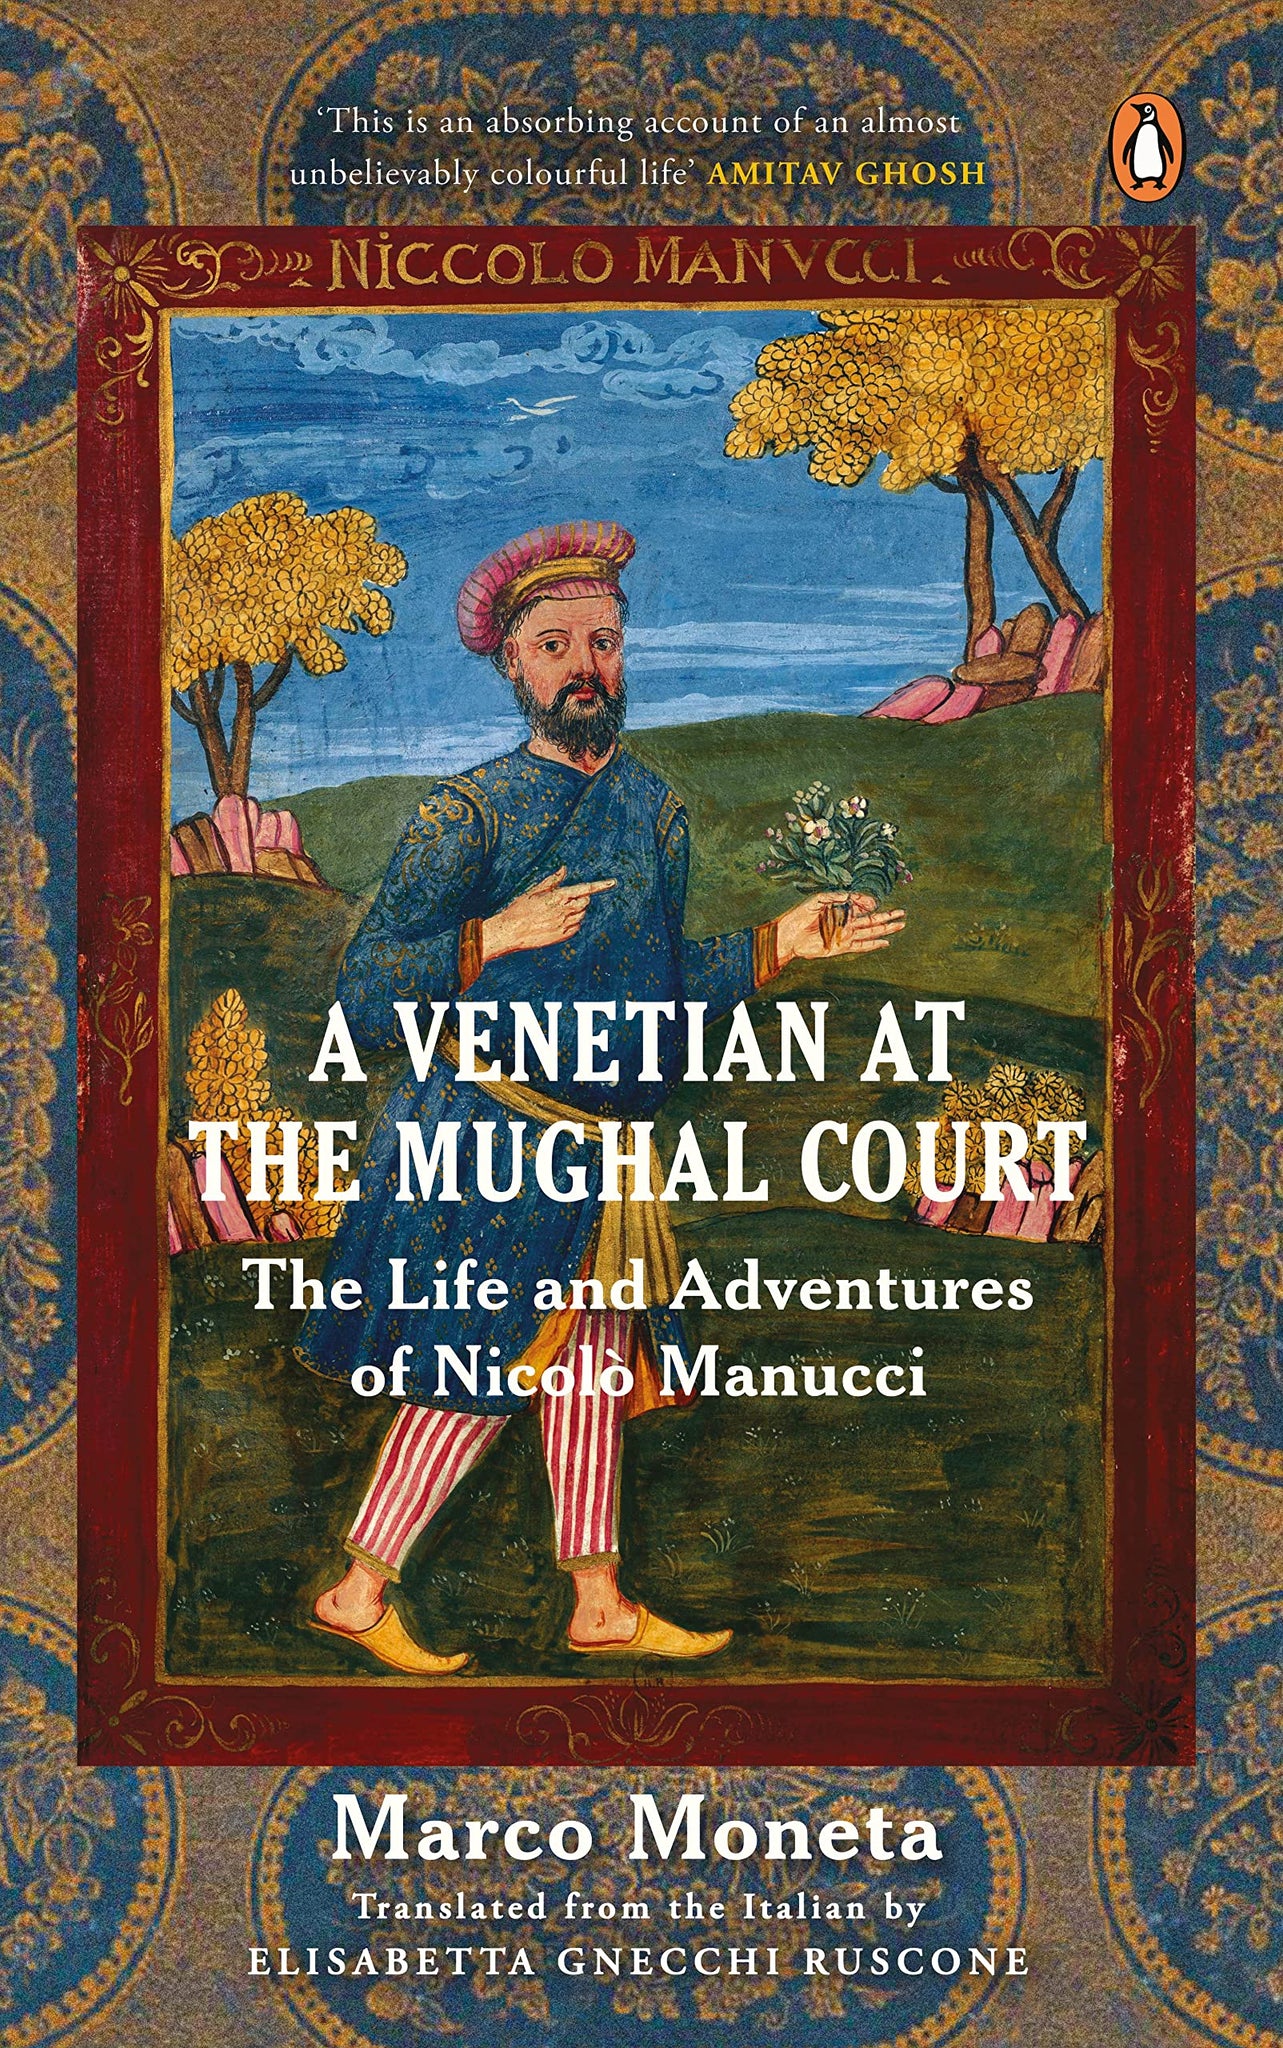 A Venetian At The Mughal Court: The Life And Adventures Of Nicolò Manucci